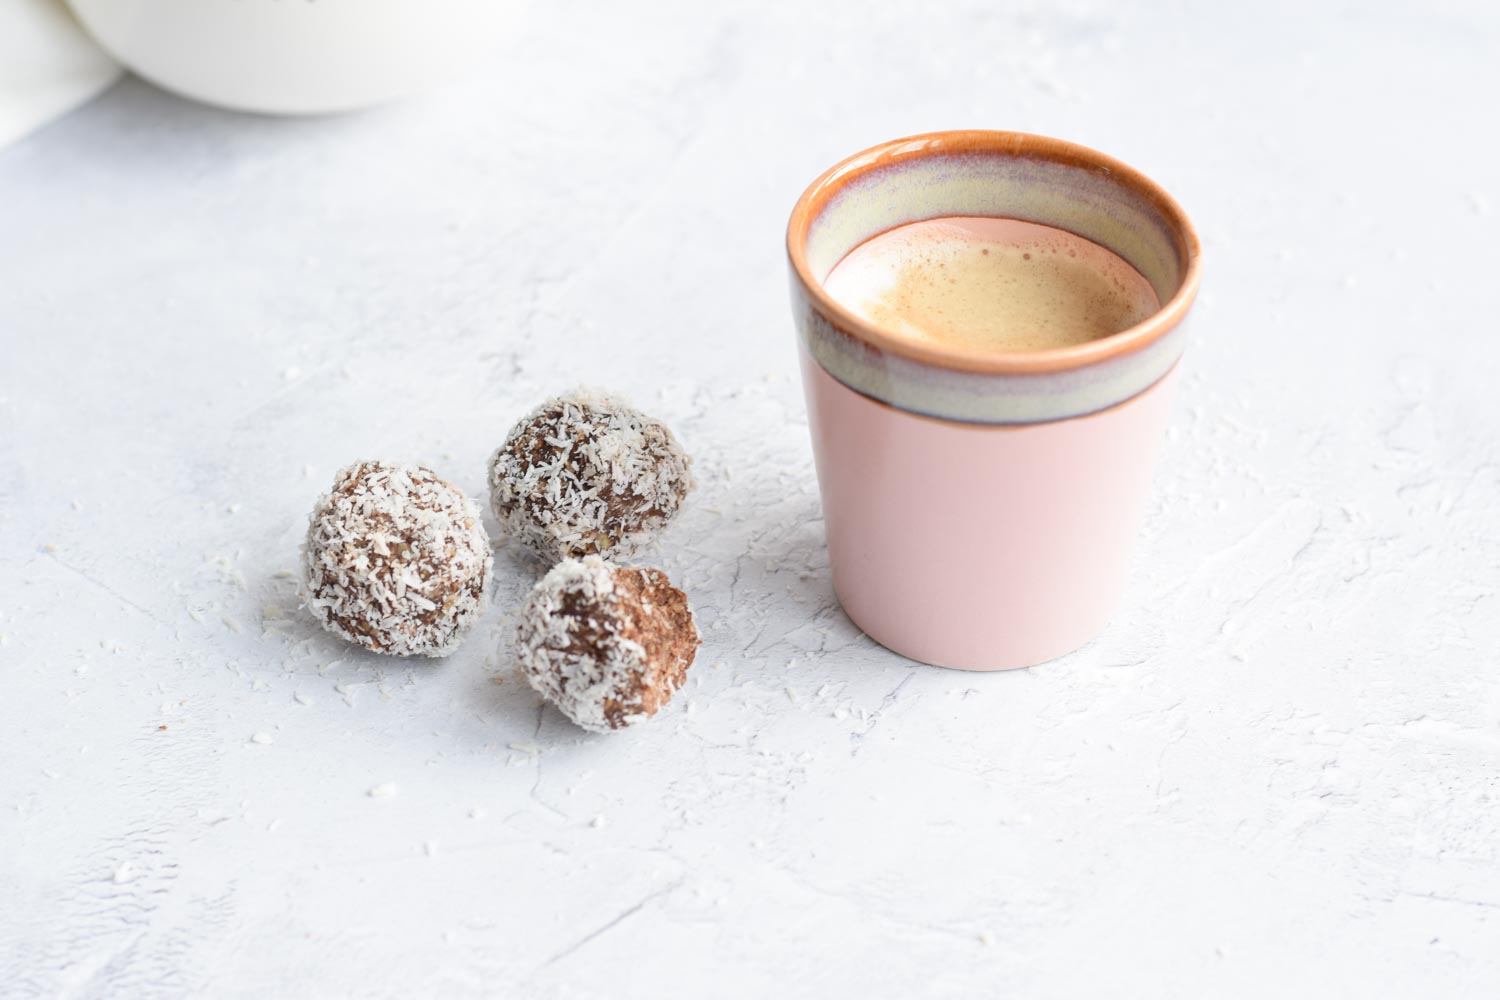 Three chocolate coconut bliss balls with a cup of coffee